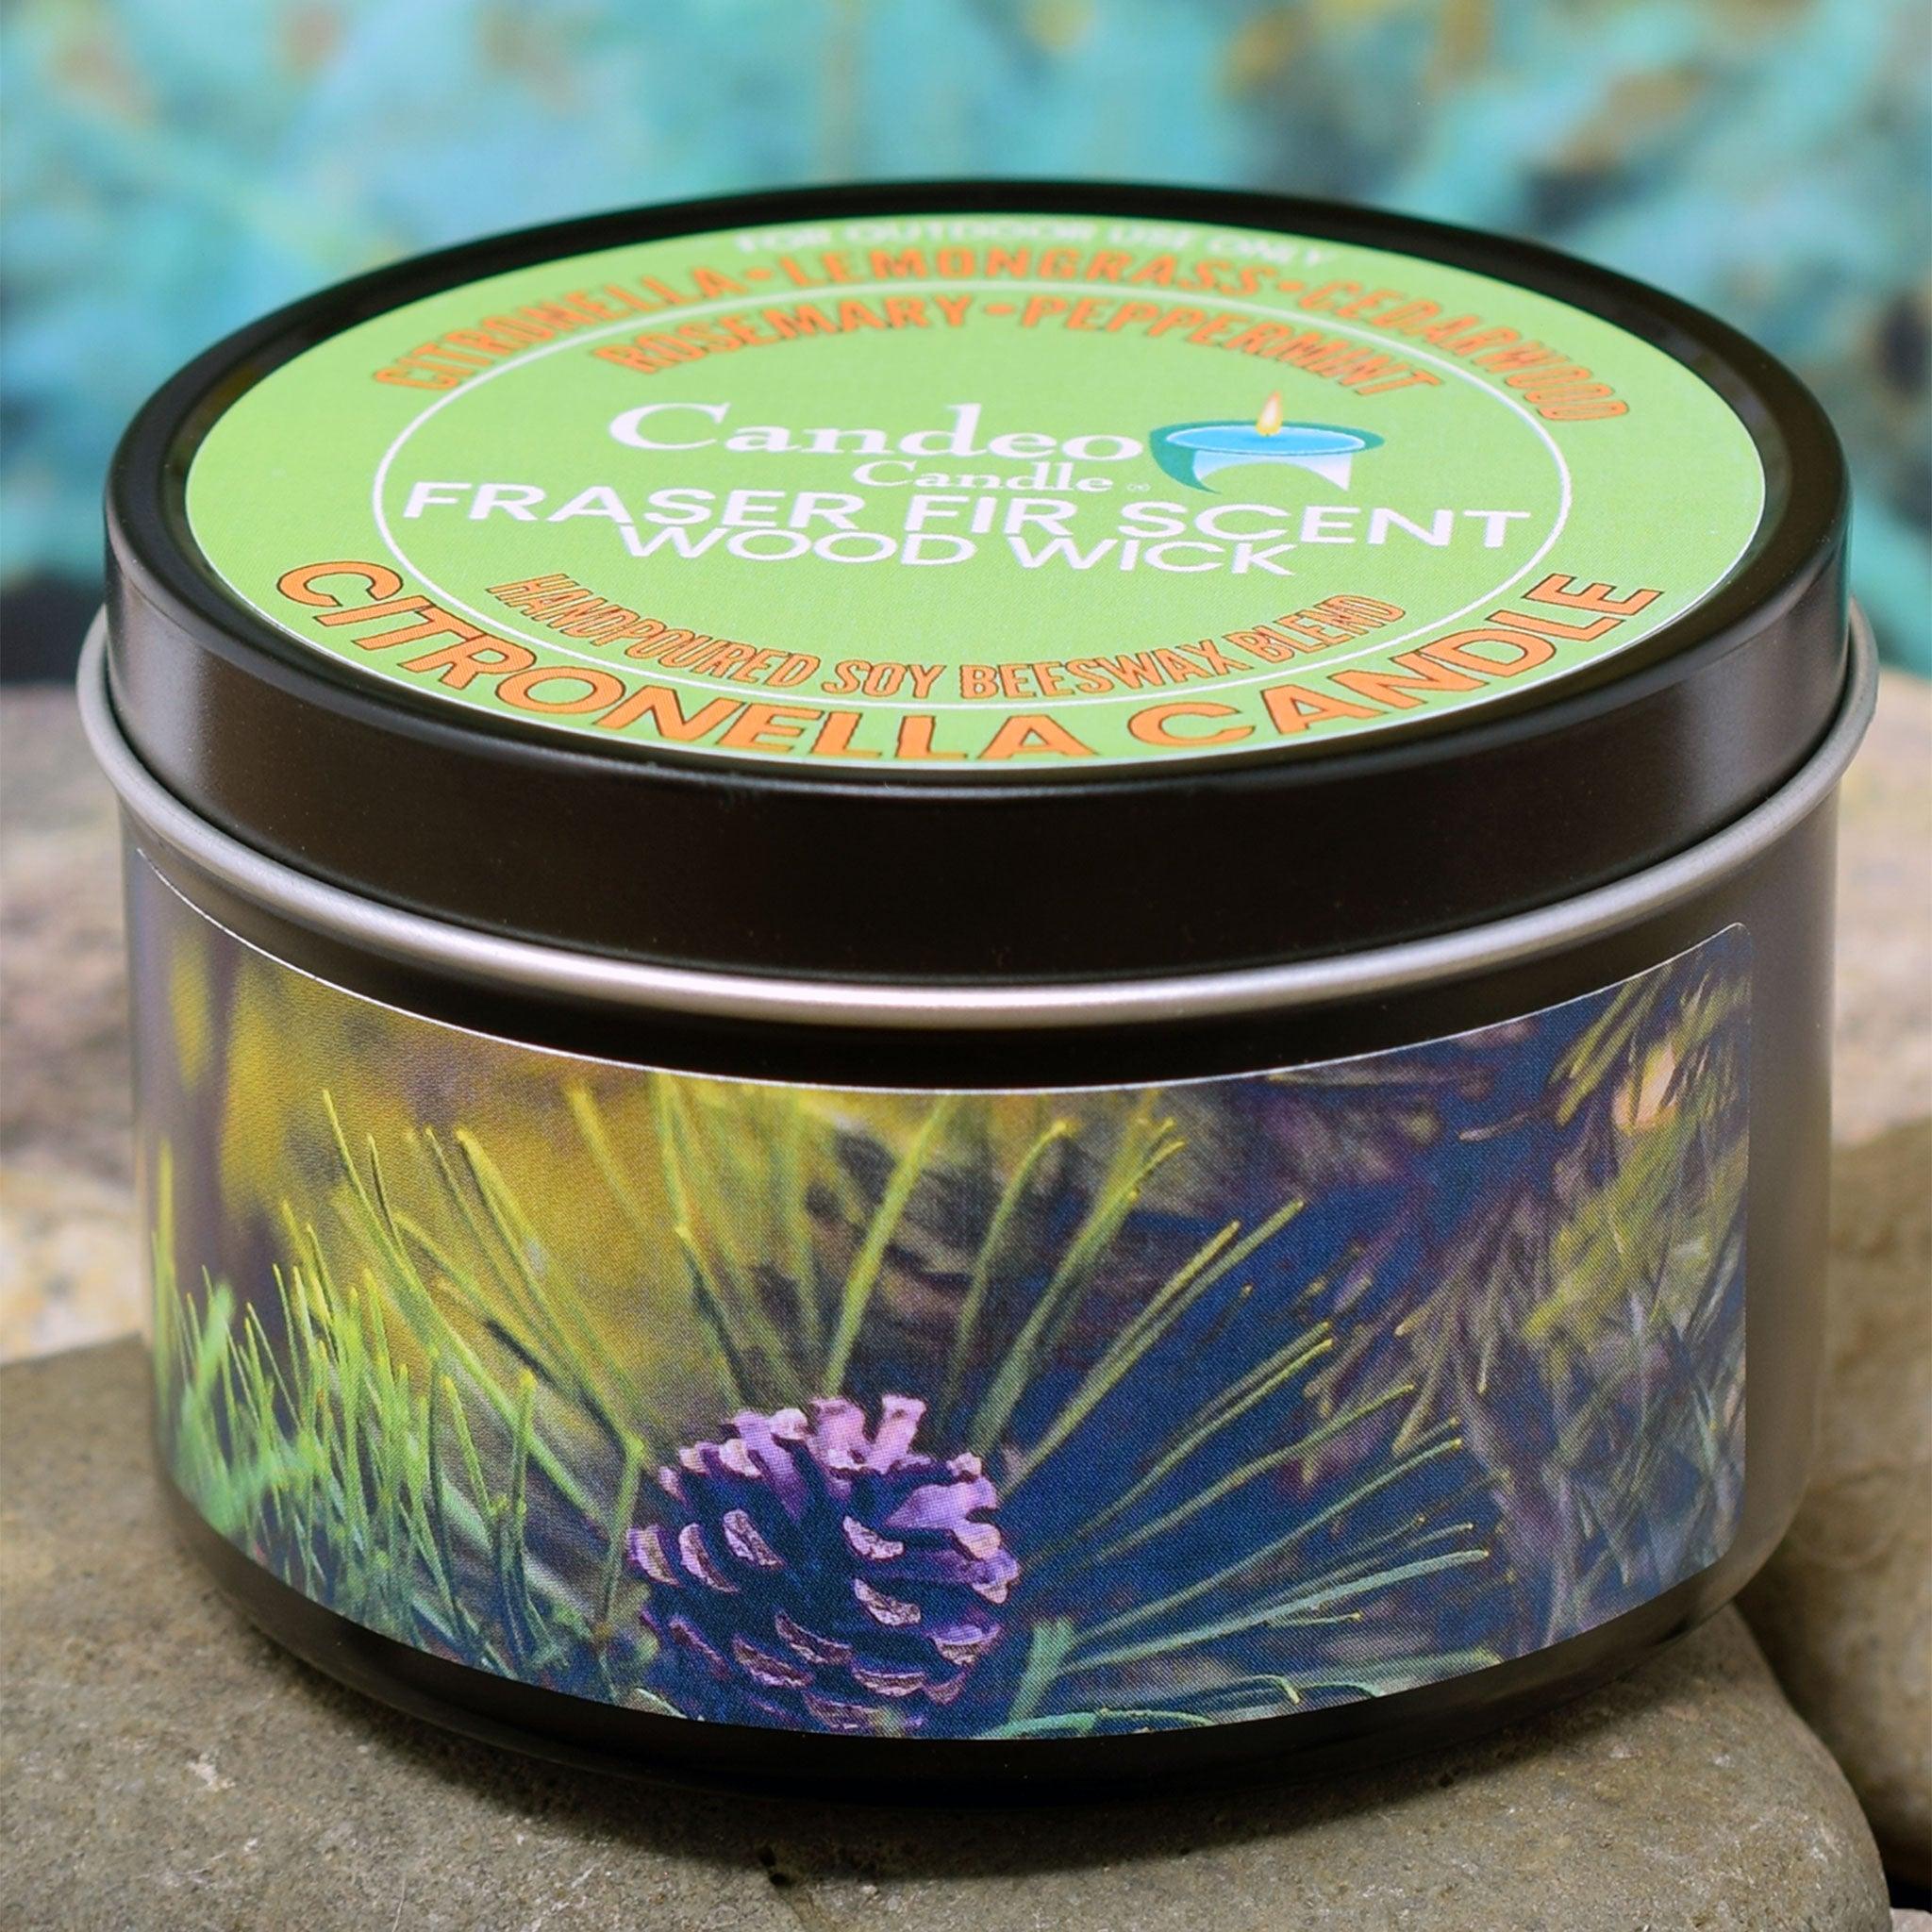 Citronella Fraser Fir Candle, Soy/Beeswax Blend, Wood Wick, 6oz Black Tin - Candeo Candle